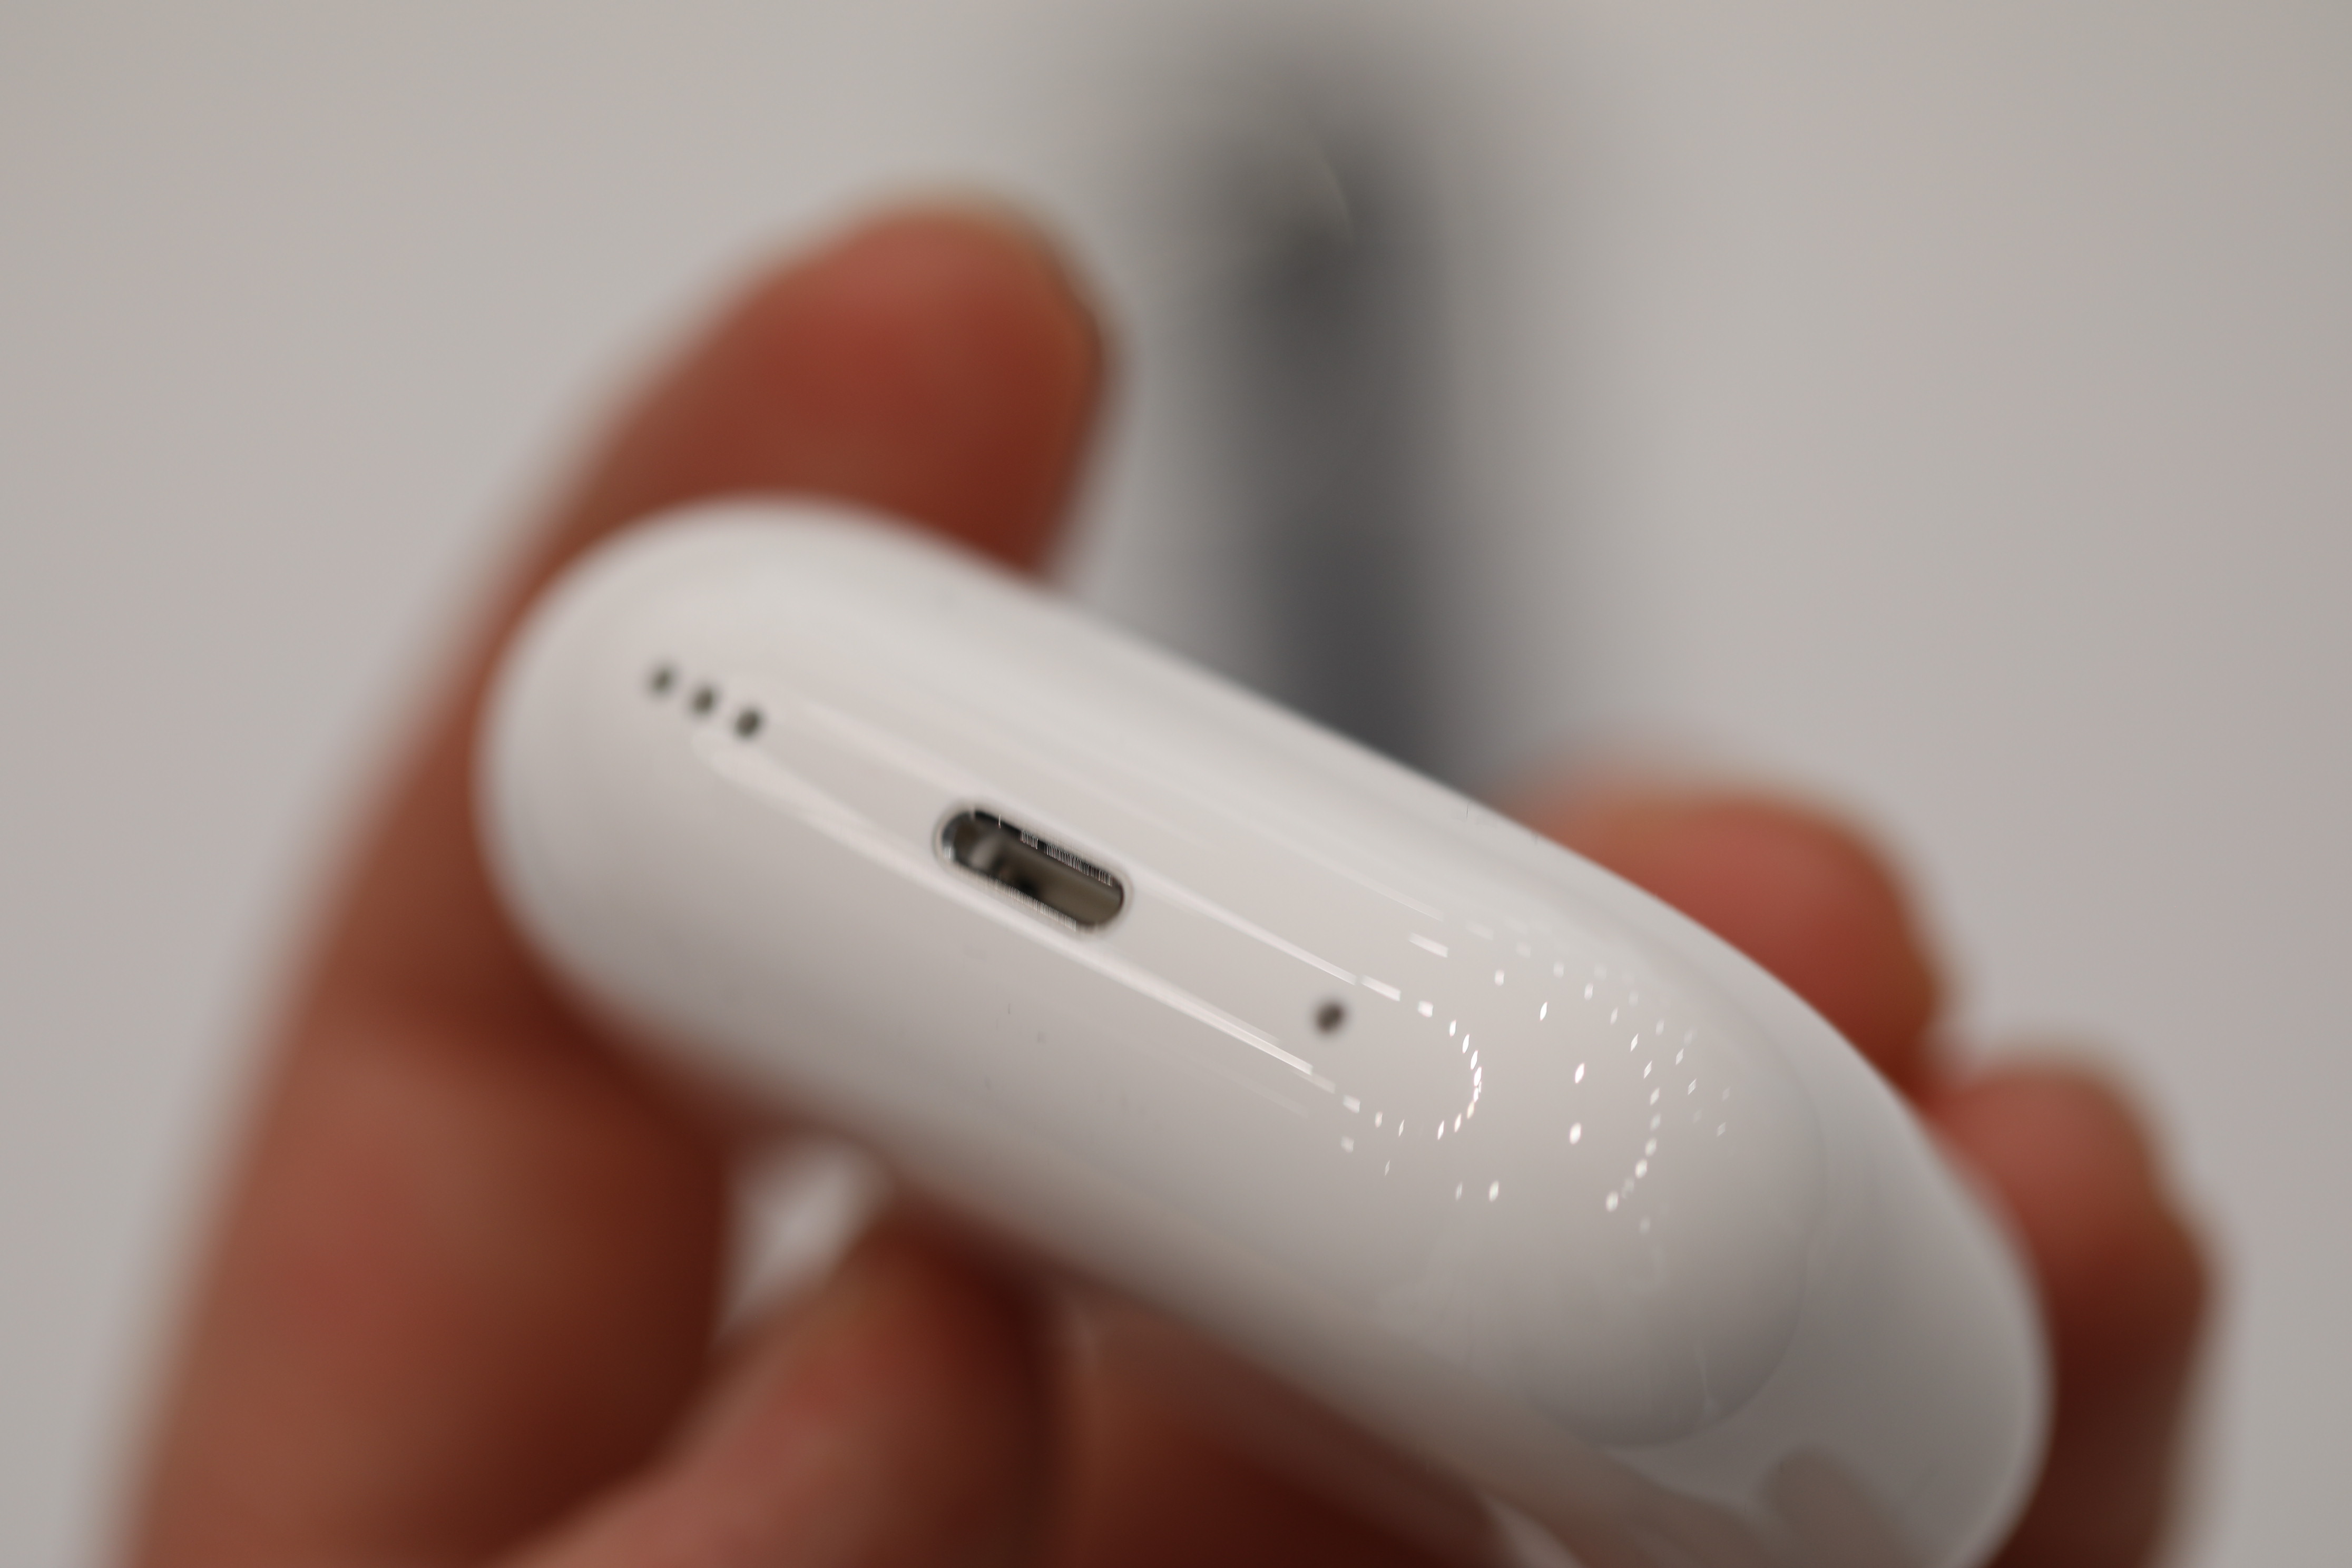 AirPod Pro case and charger from the Apple Fall 2022 Event